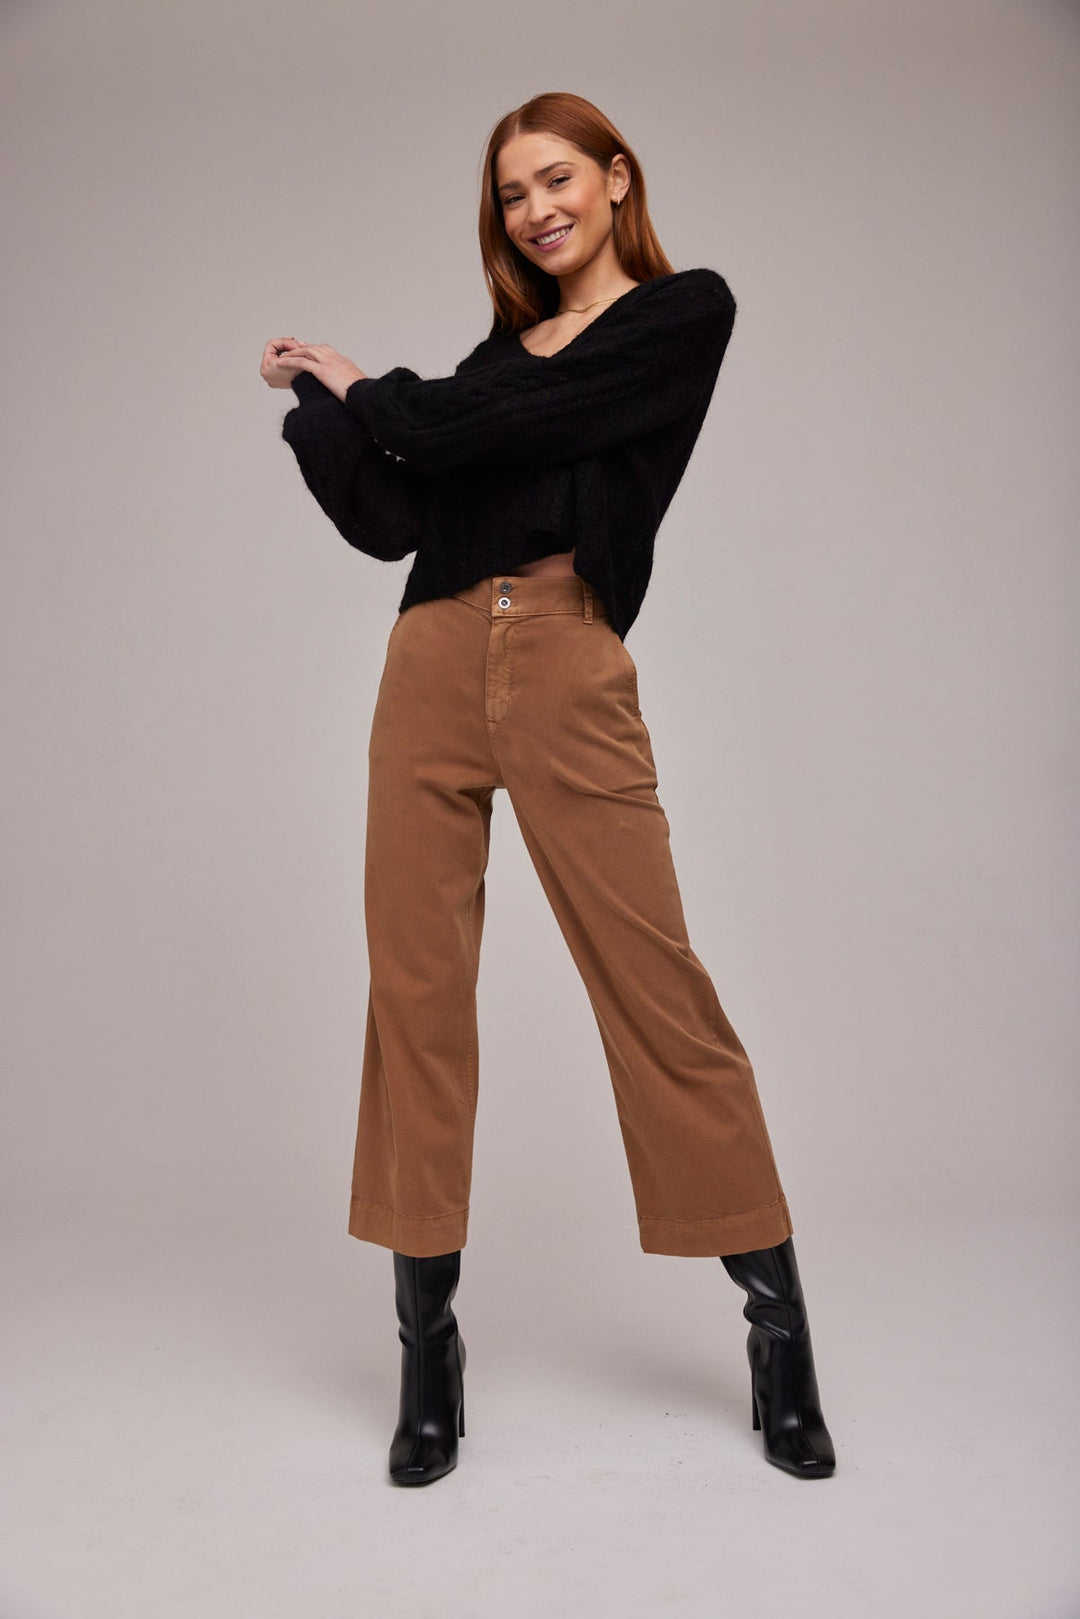 Meet our super soft Saige wide leg crops, these pants never go out of style. These are super versatile, comfortable, and they will become your new favorite pair of pants! Wear them casually with sandals and a tee in the AM or with heels and a blouse for an evening party. Either way you will love their versatility!Made with 49% Lyocell 49% Viscose 2% Lycra.